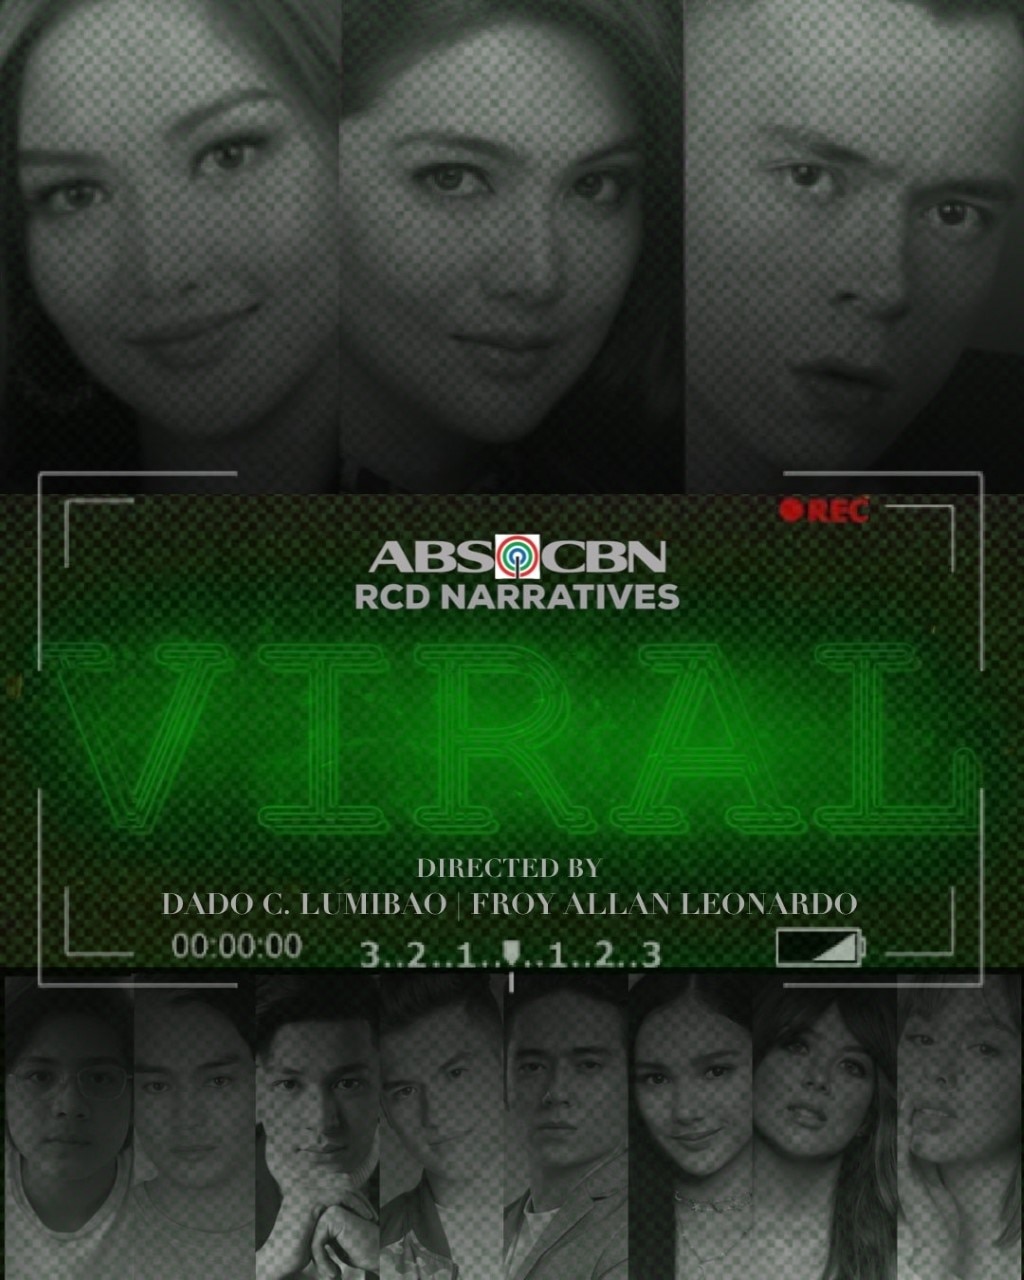 The stories behind controversial videos revealed in new ABS-CBN series starring Jake, Dimples, and Charlie